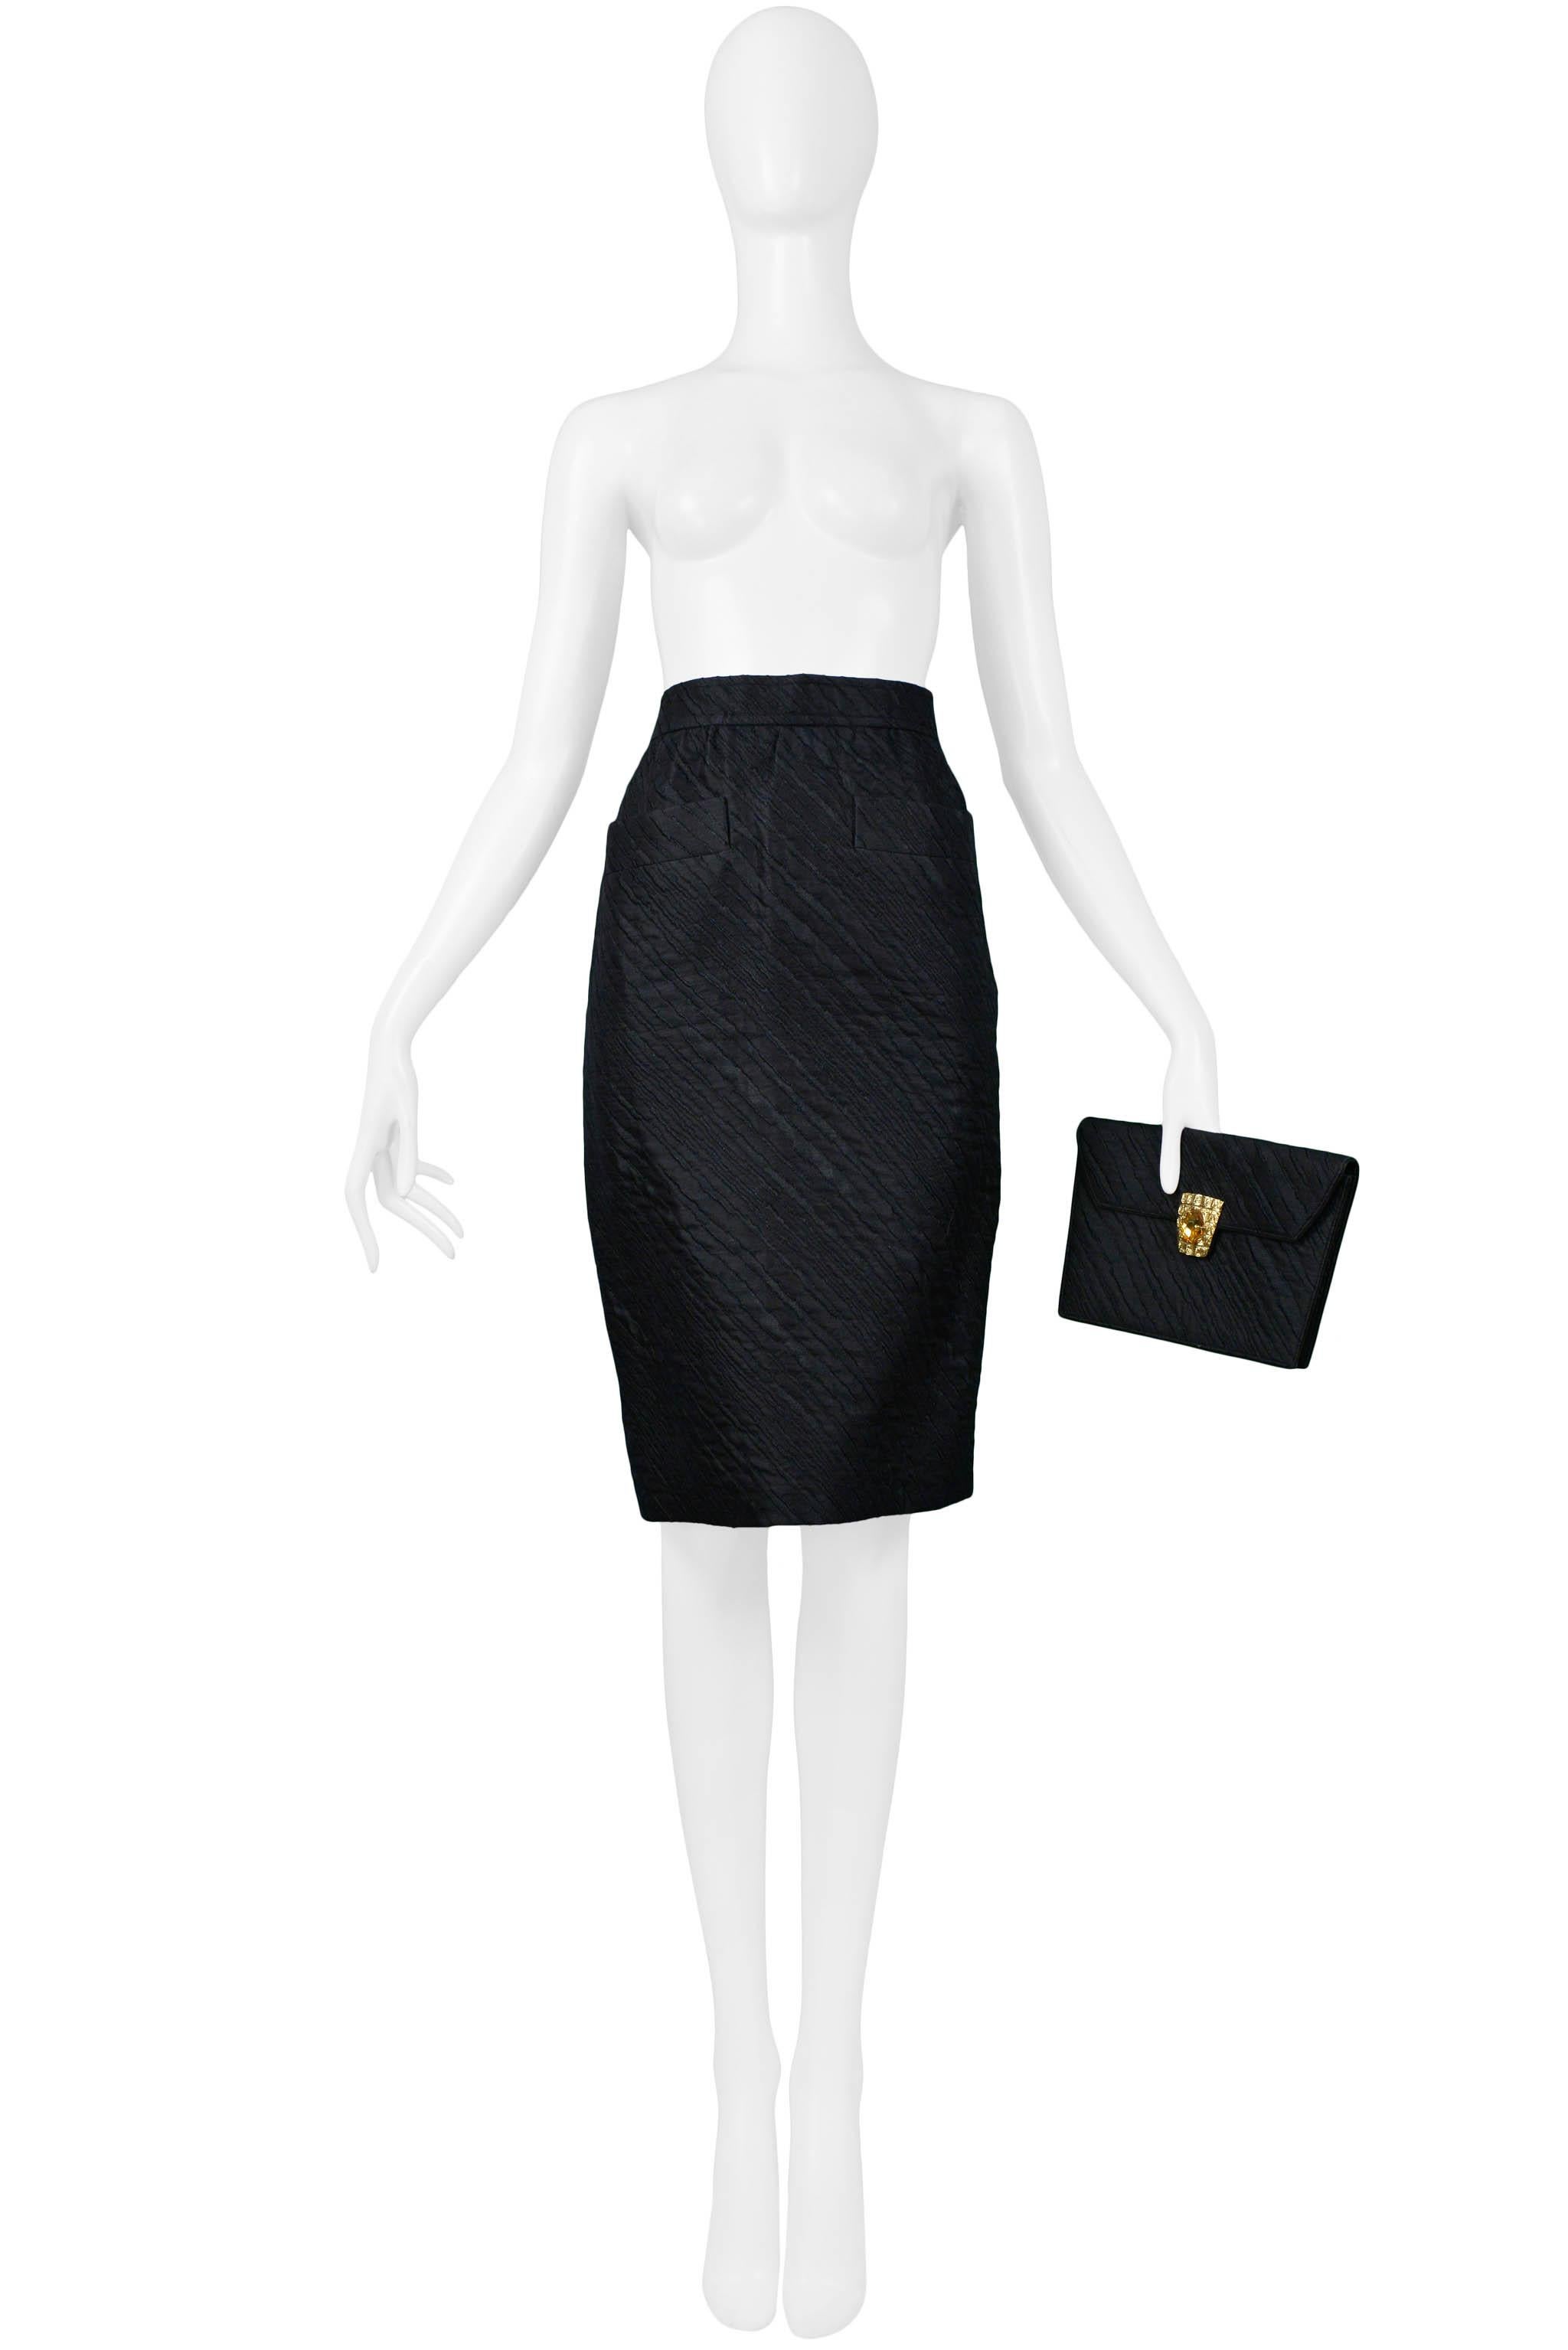 Resurrection Vintage is excited to offer a vintage Yves Saint Laurent black jacquard pencil skirt with slit pockets at front and a matching evening clutch with yellow stone and embossed gold-tone hardware closure.

Yves Saint Laurent
Size